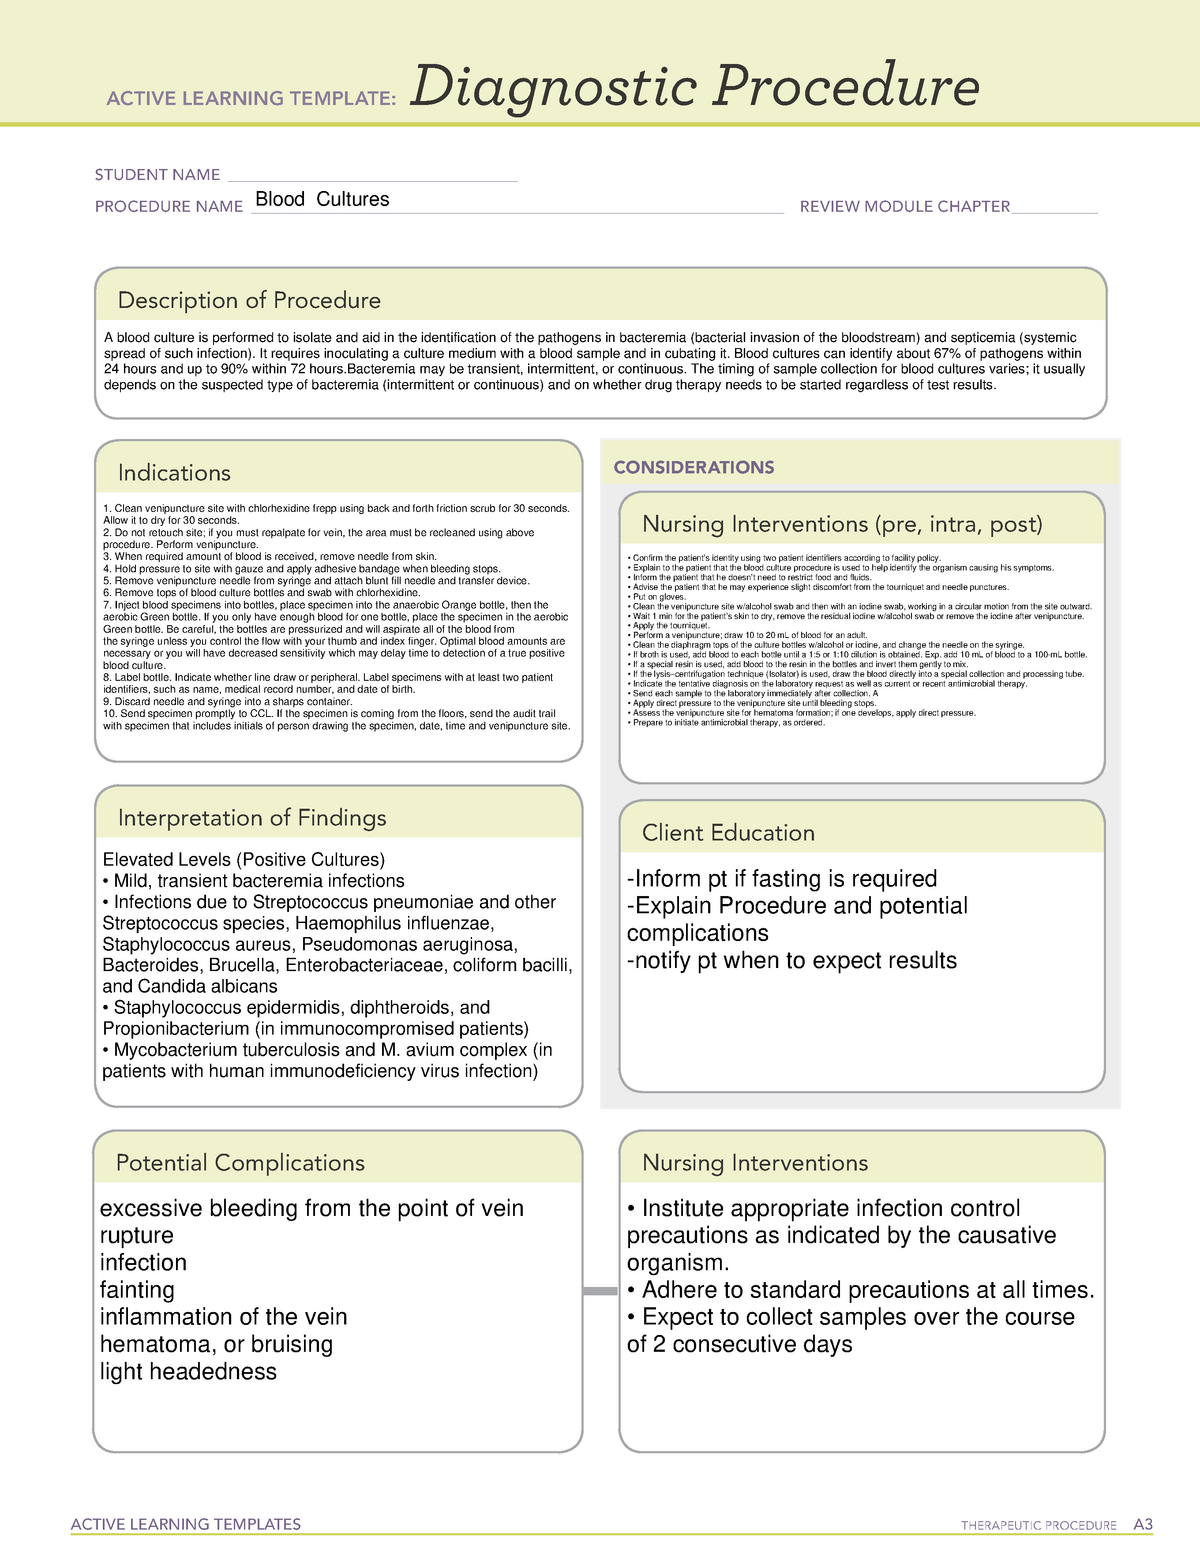 wound-care-active-learning-template